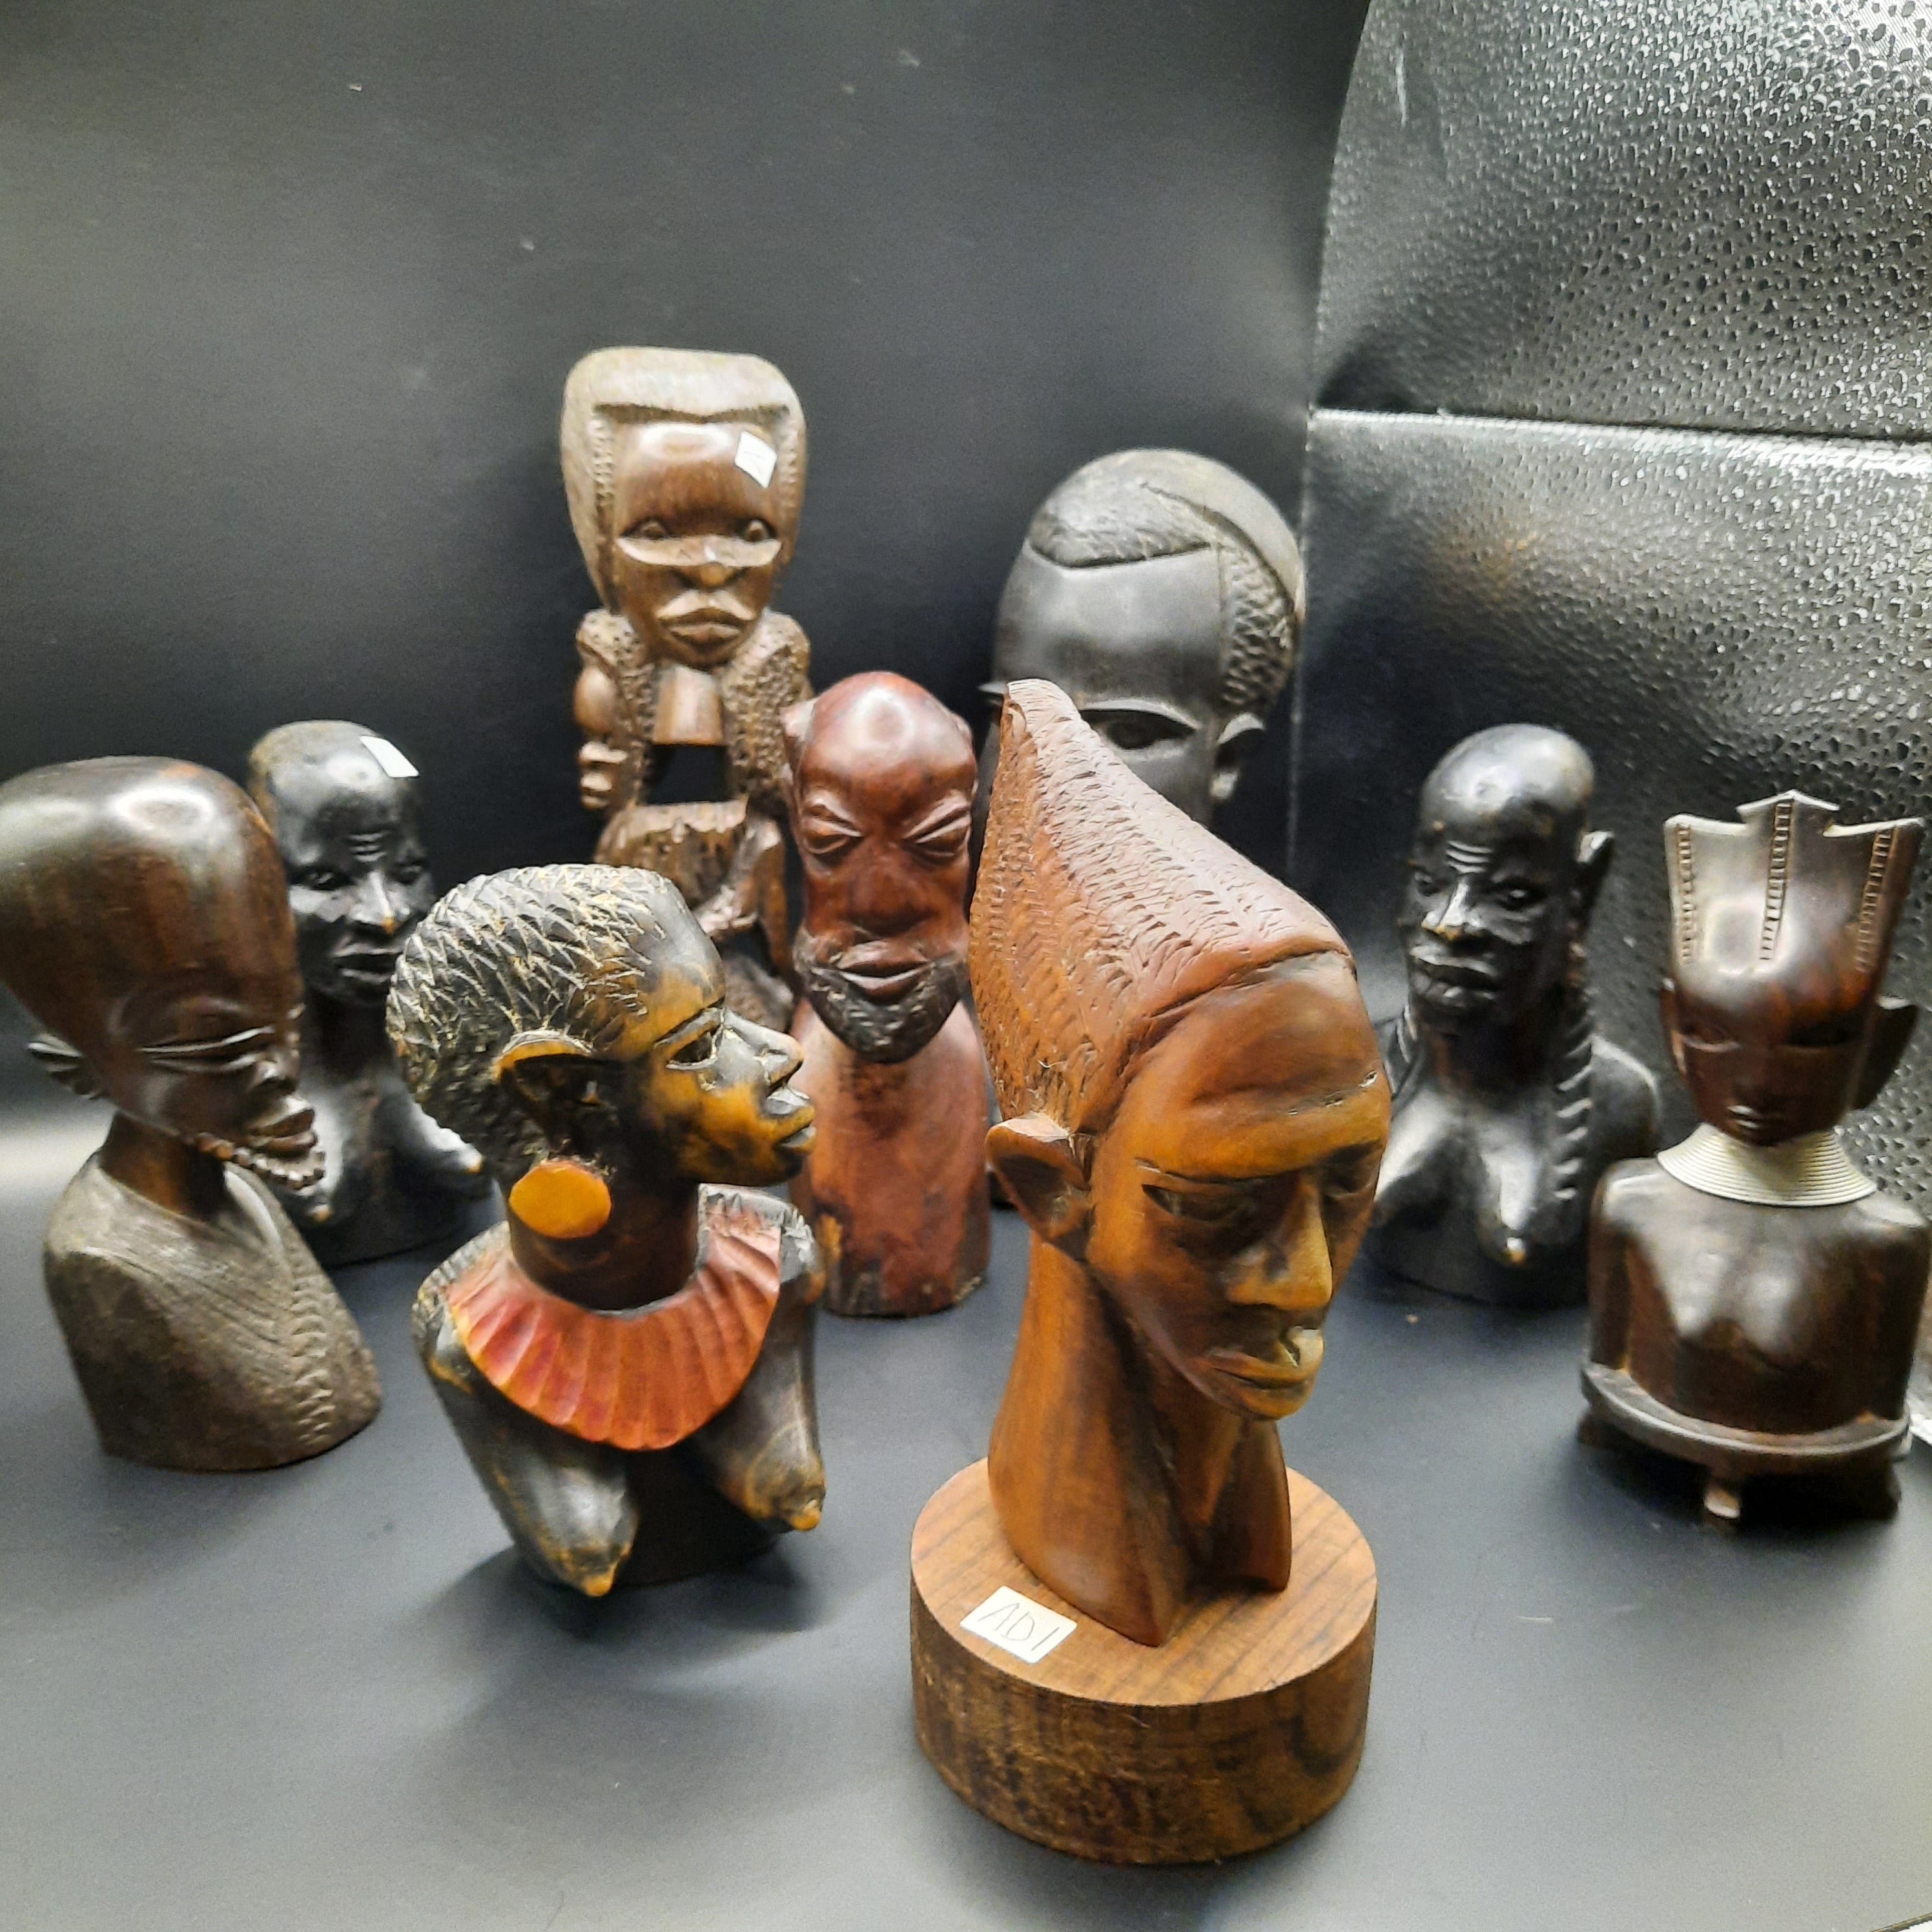 Carvings (all different)